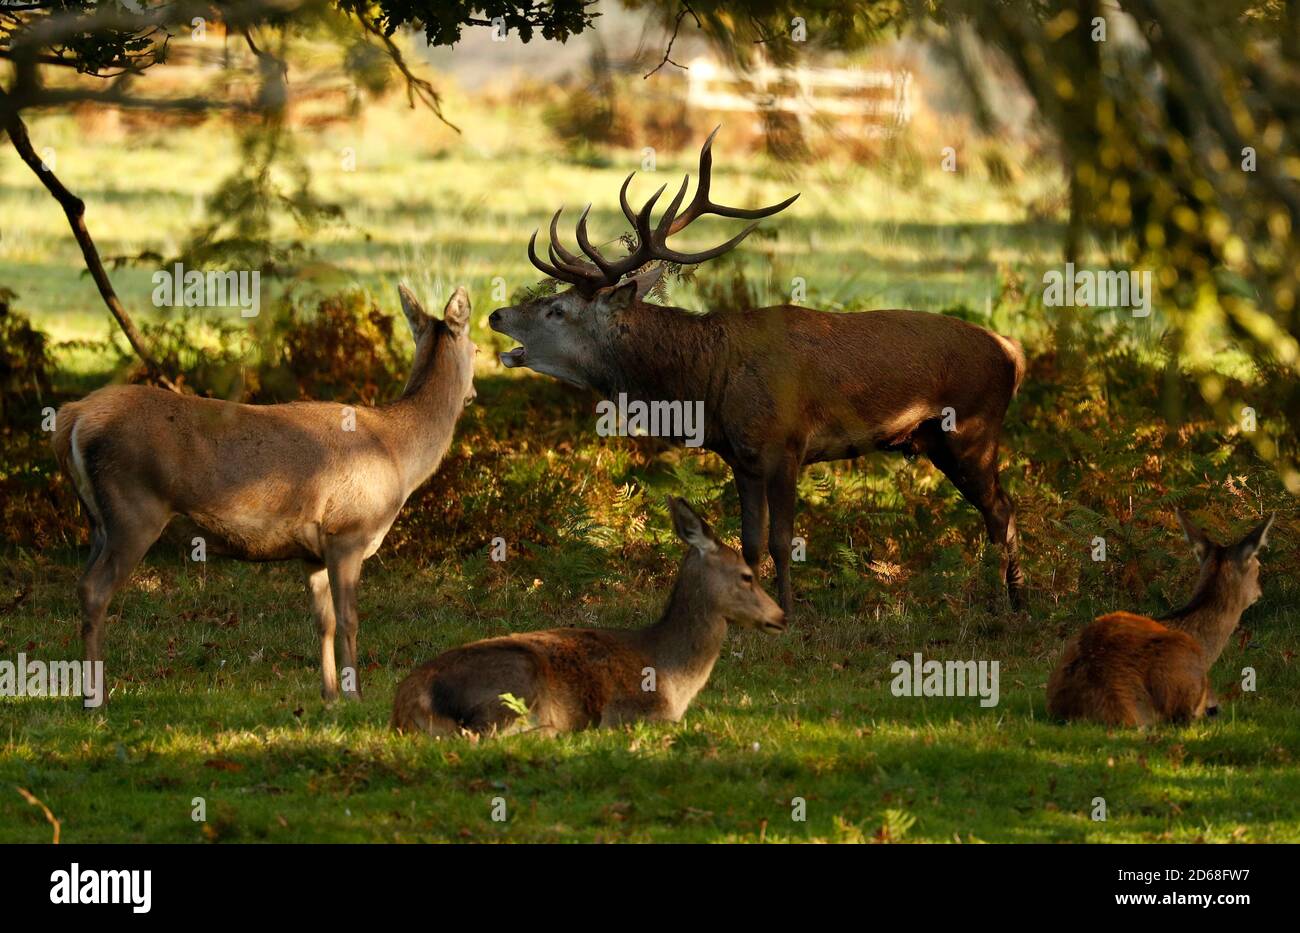 Newtown Linford, Leicestershire, UK. 15th October 2020. A Red Deer stag barks during the rutting season in Bradgate Park. Credit Darren Staples/Alamy Live News. Stock Photo